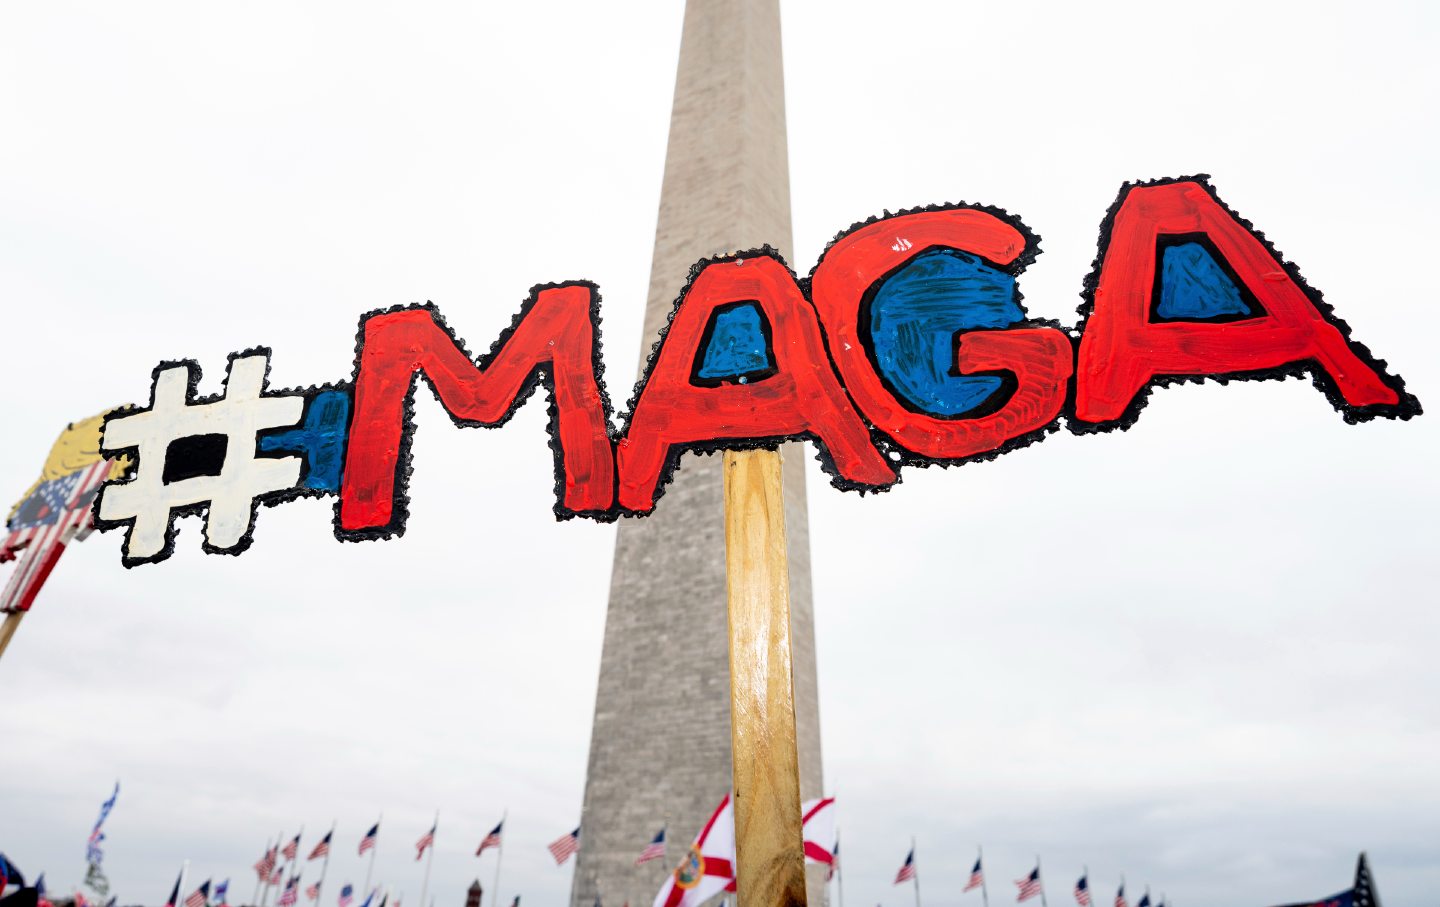 A MAGA sign in front of the Washington Monument at a Jan 6 Trump rally.